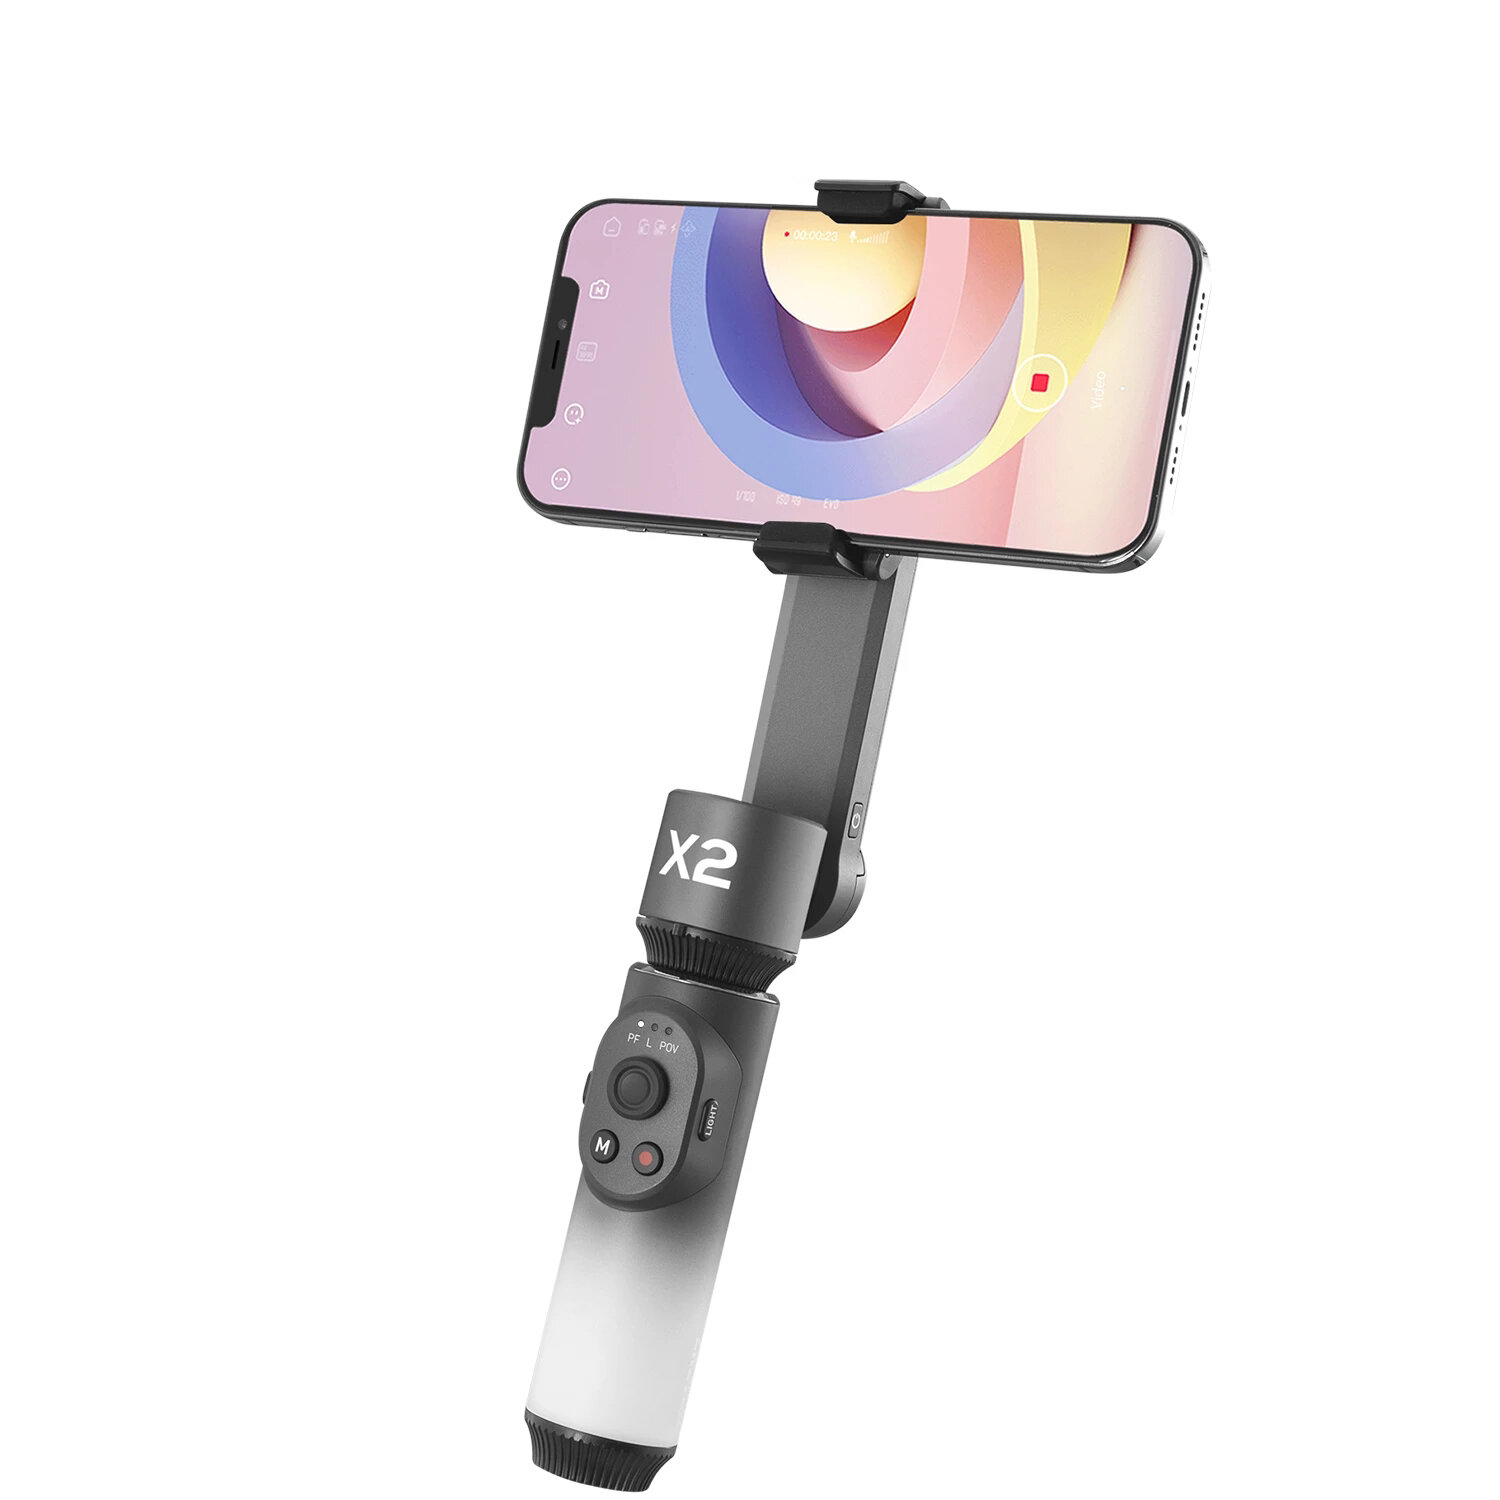 Image of ZHIYUN SMOOTH X2 Phone Gimbal bluetooth Handheld Stabilizer 2-Axis Smartphone Gimbals Selfie Stick Online Learning Live